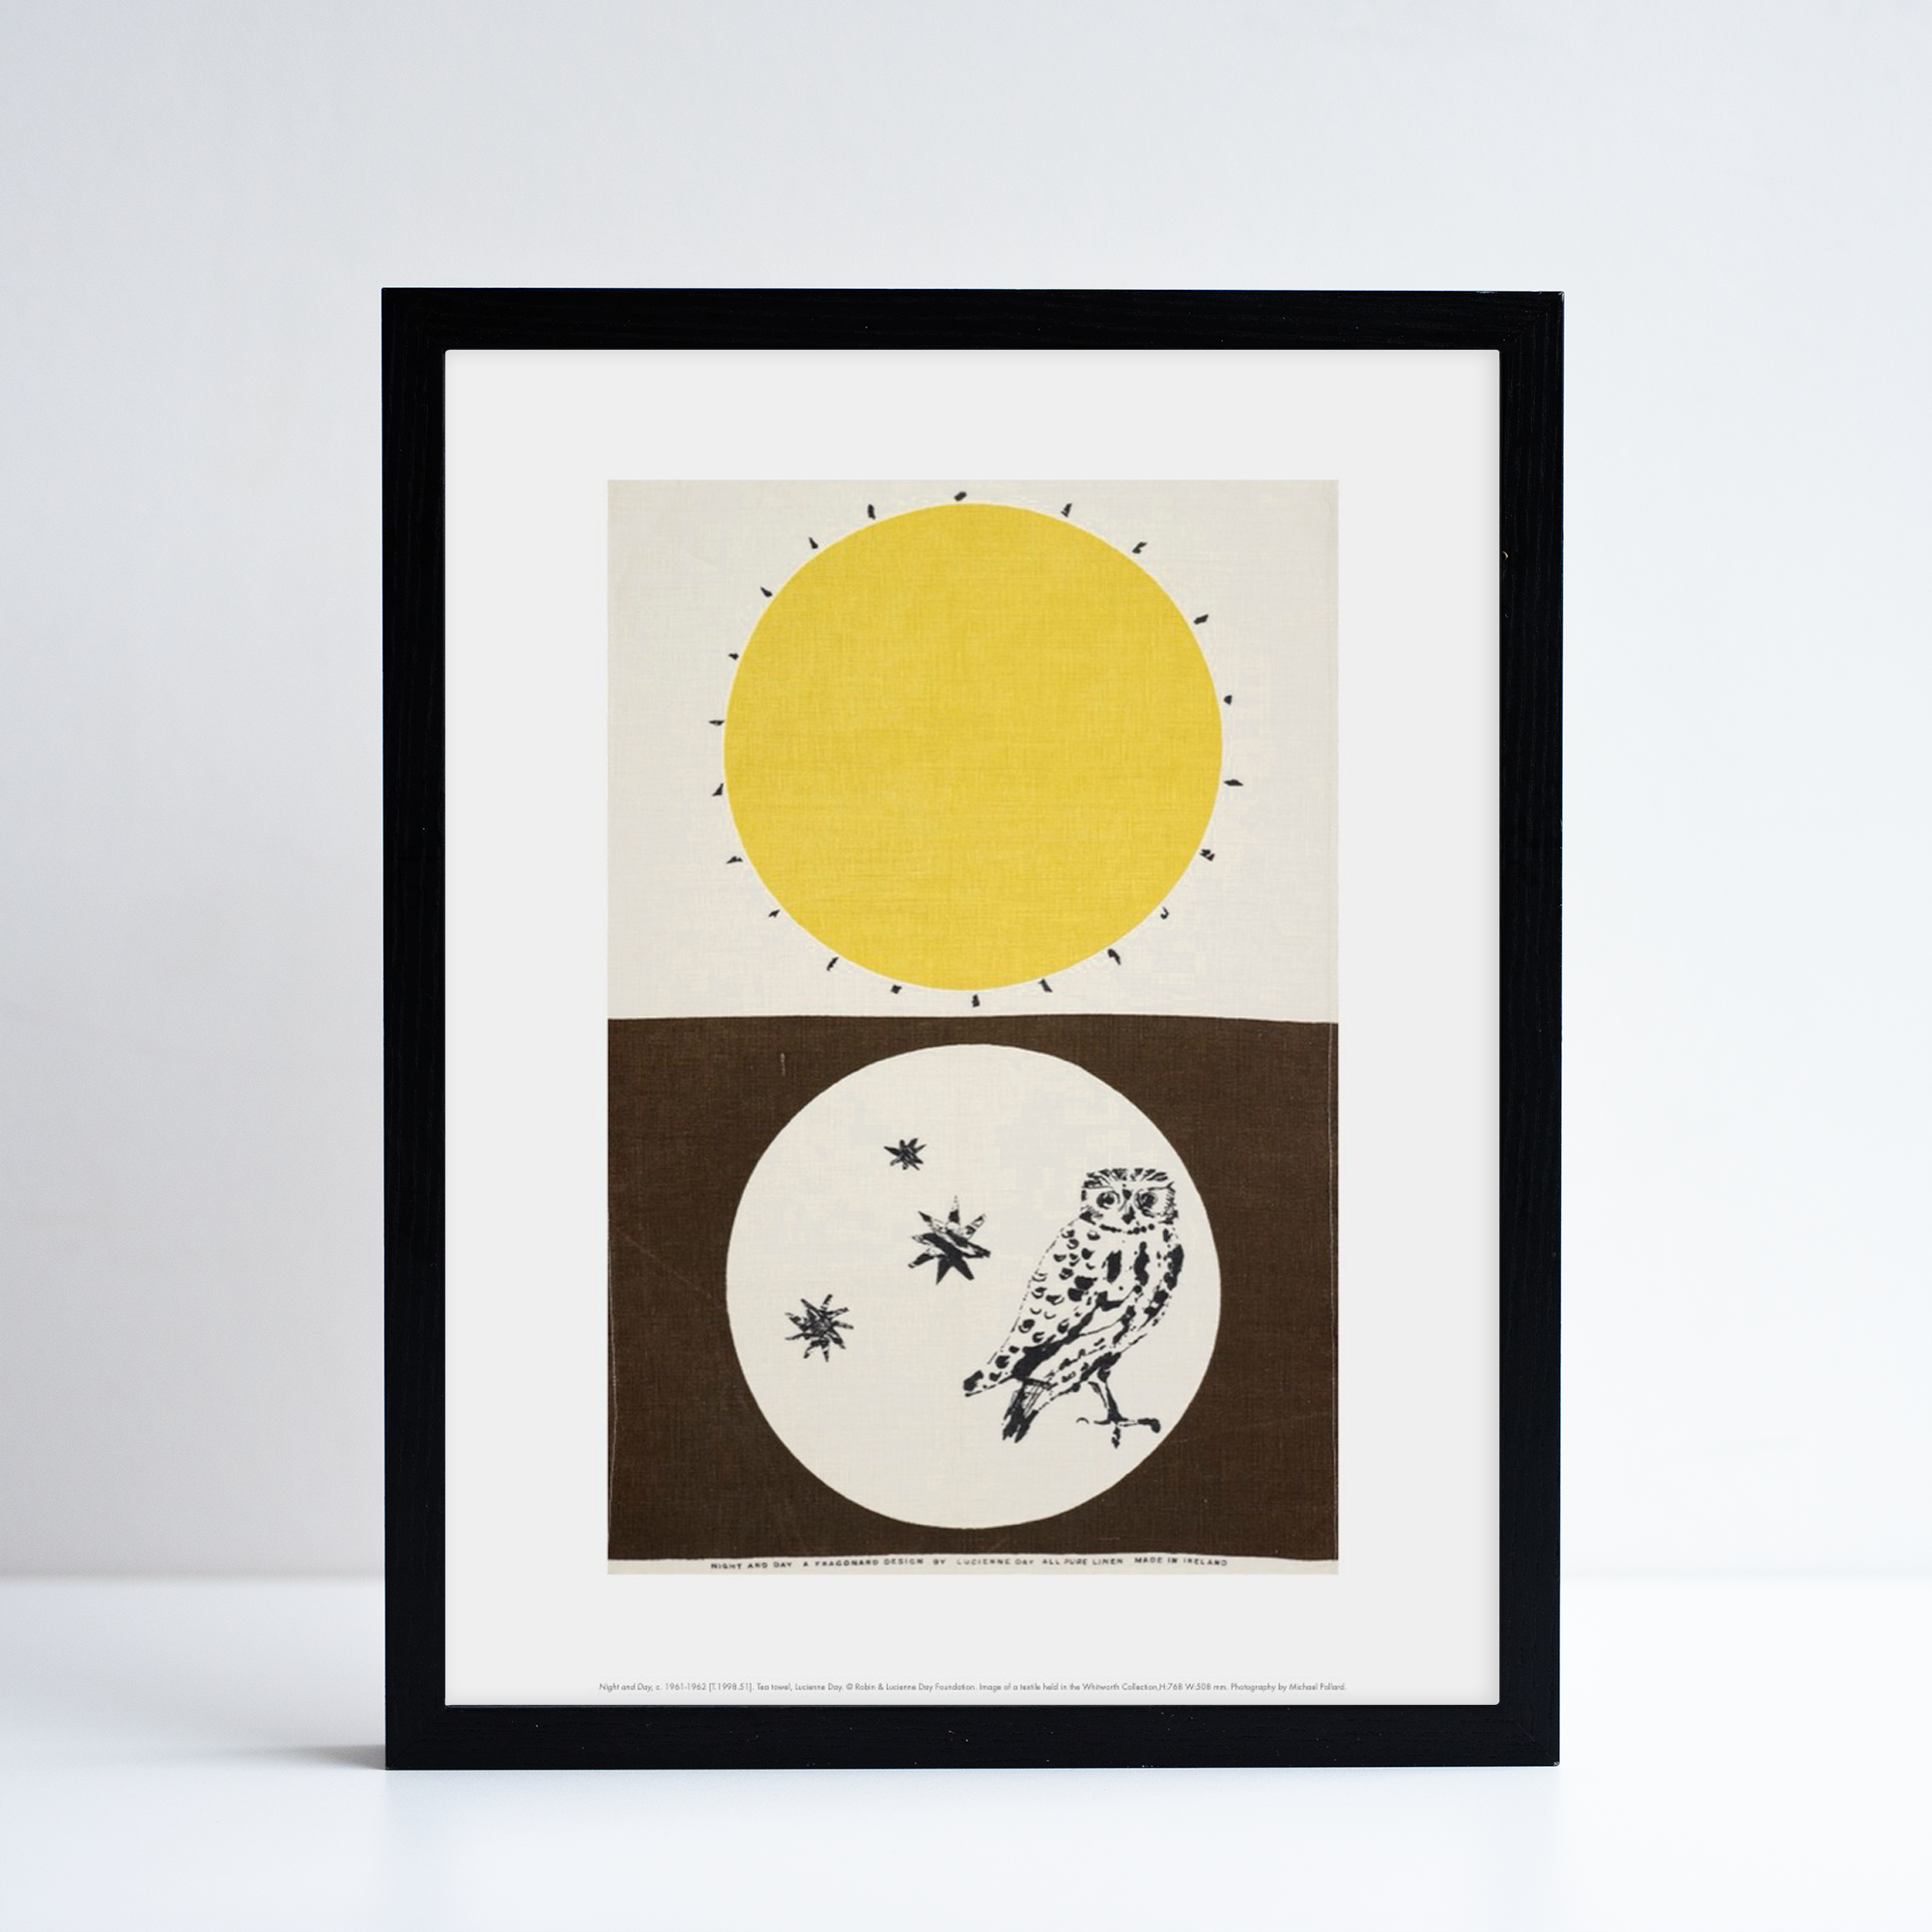 Framed reproduction of Night and Day by Lucienne day. The print has a owl at the bottom half and a sun at the top.